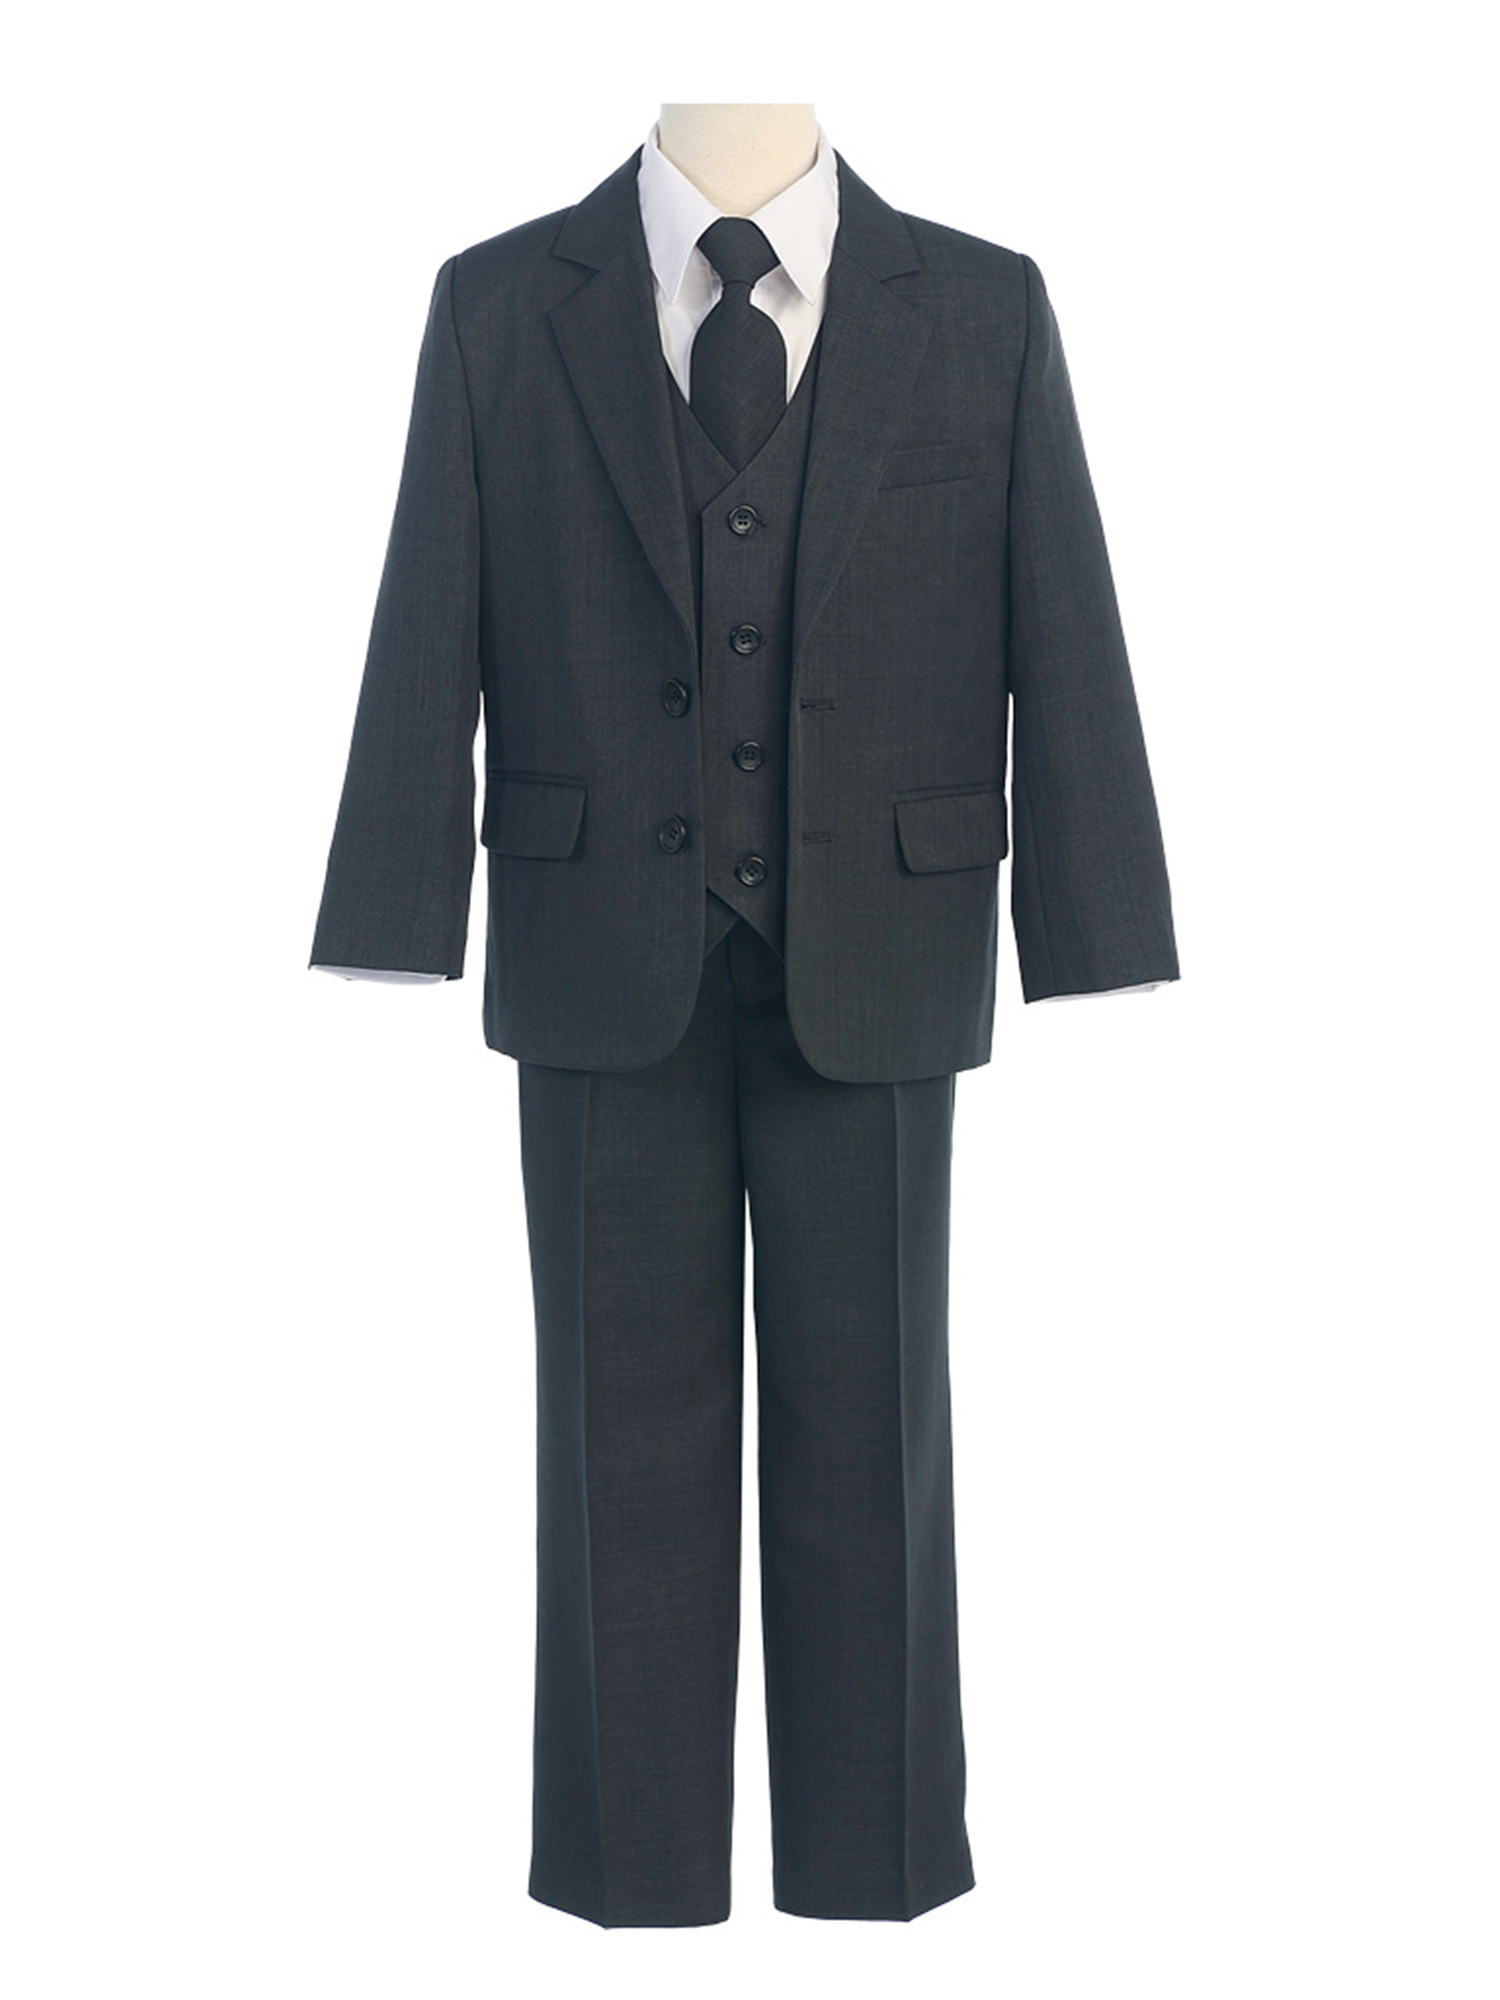 COLE Boys Suit with Shirt and Vest (5-Piece) - Charcoal Grey - Size 6